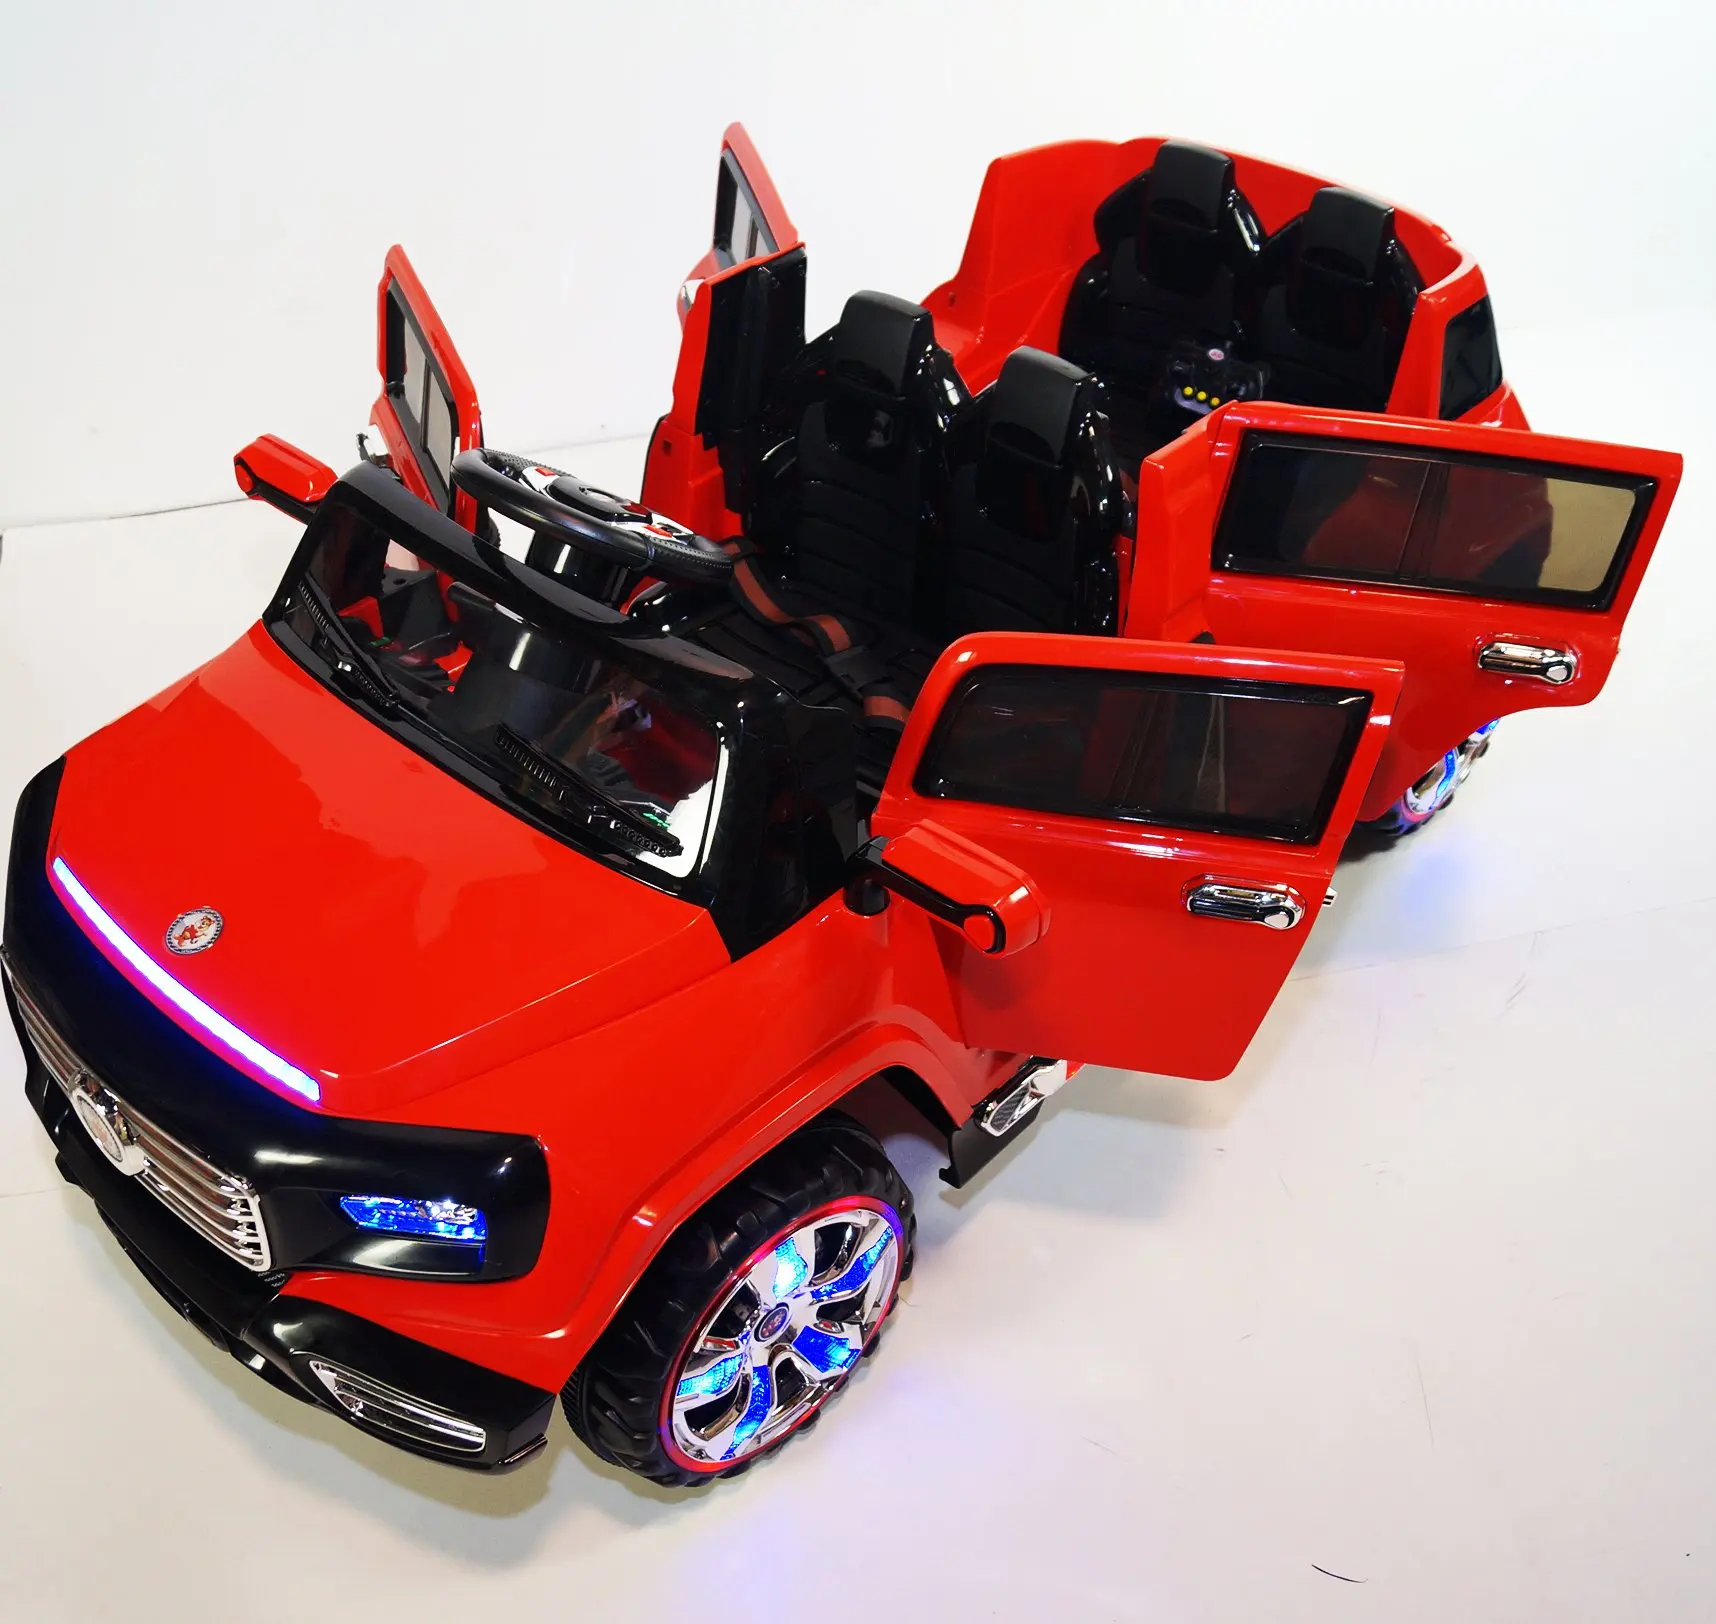 electric ride on cars for 2 year olds